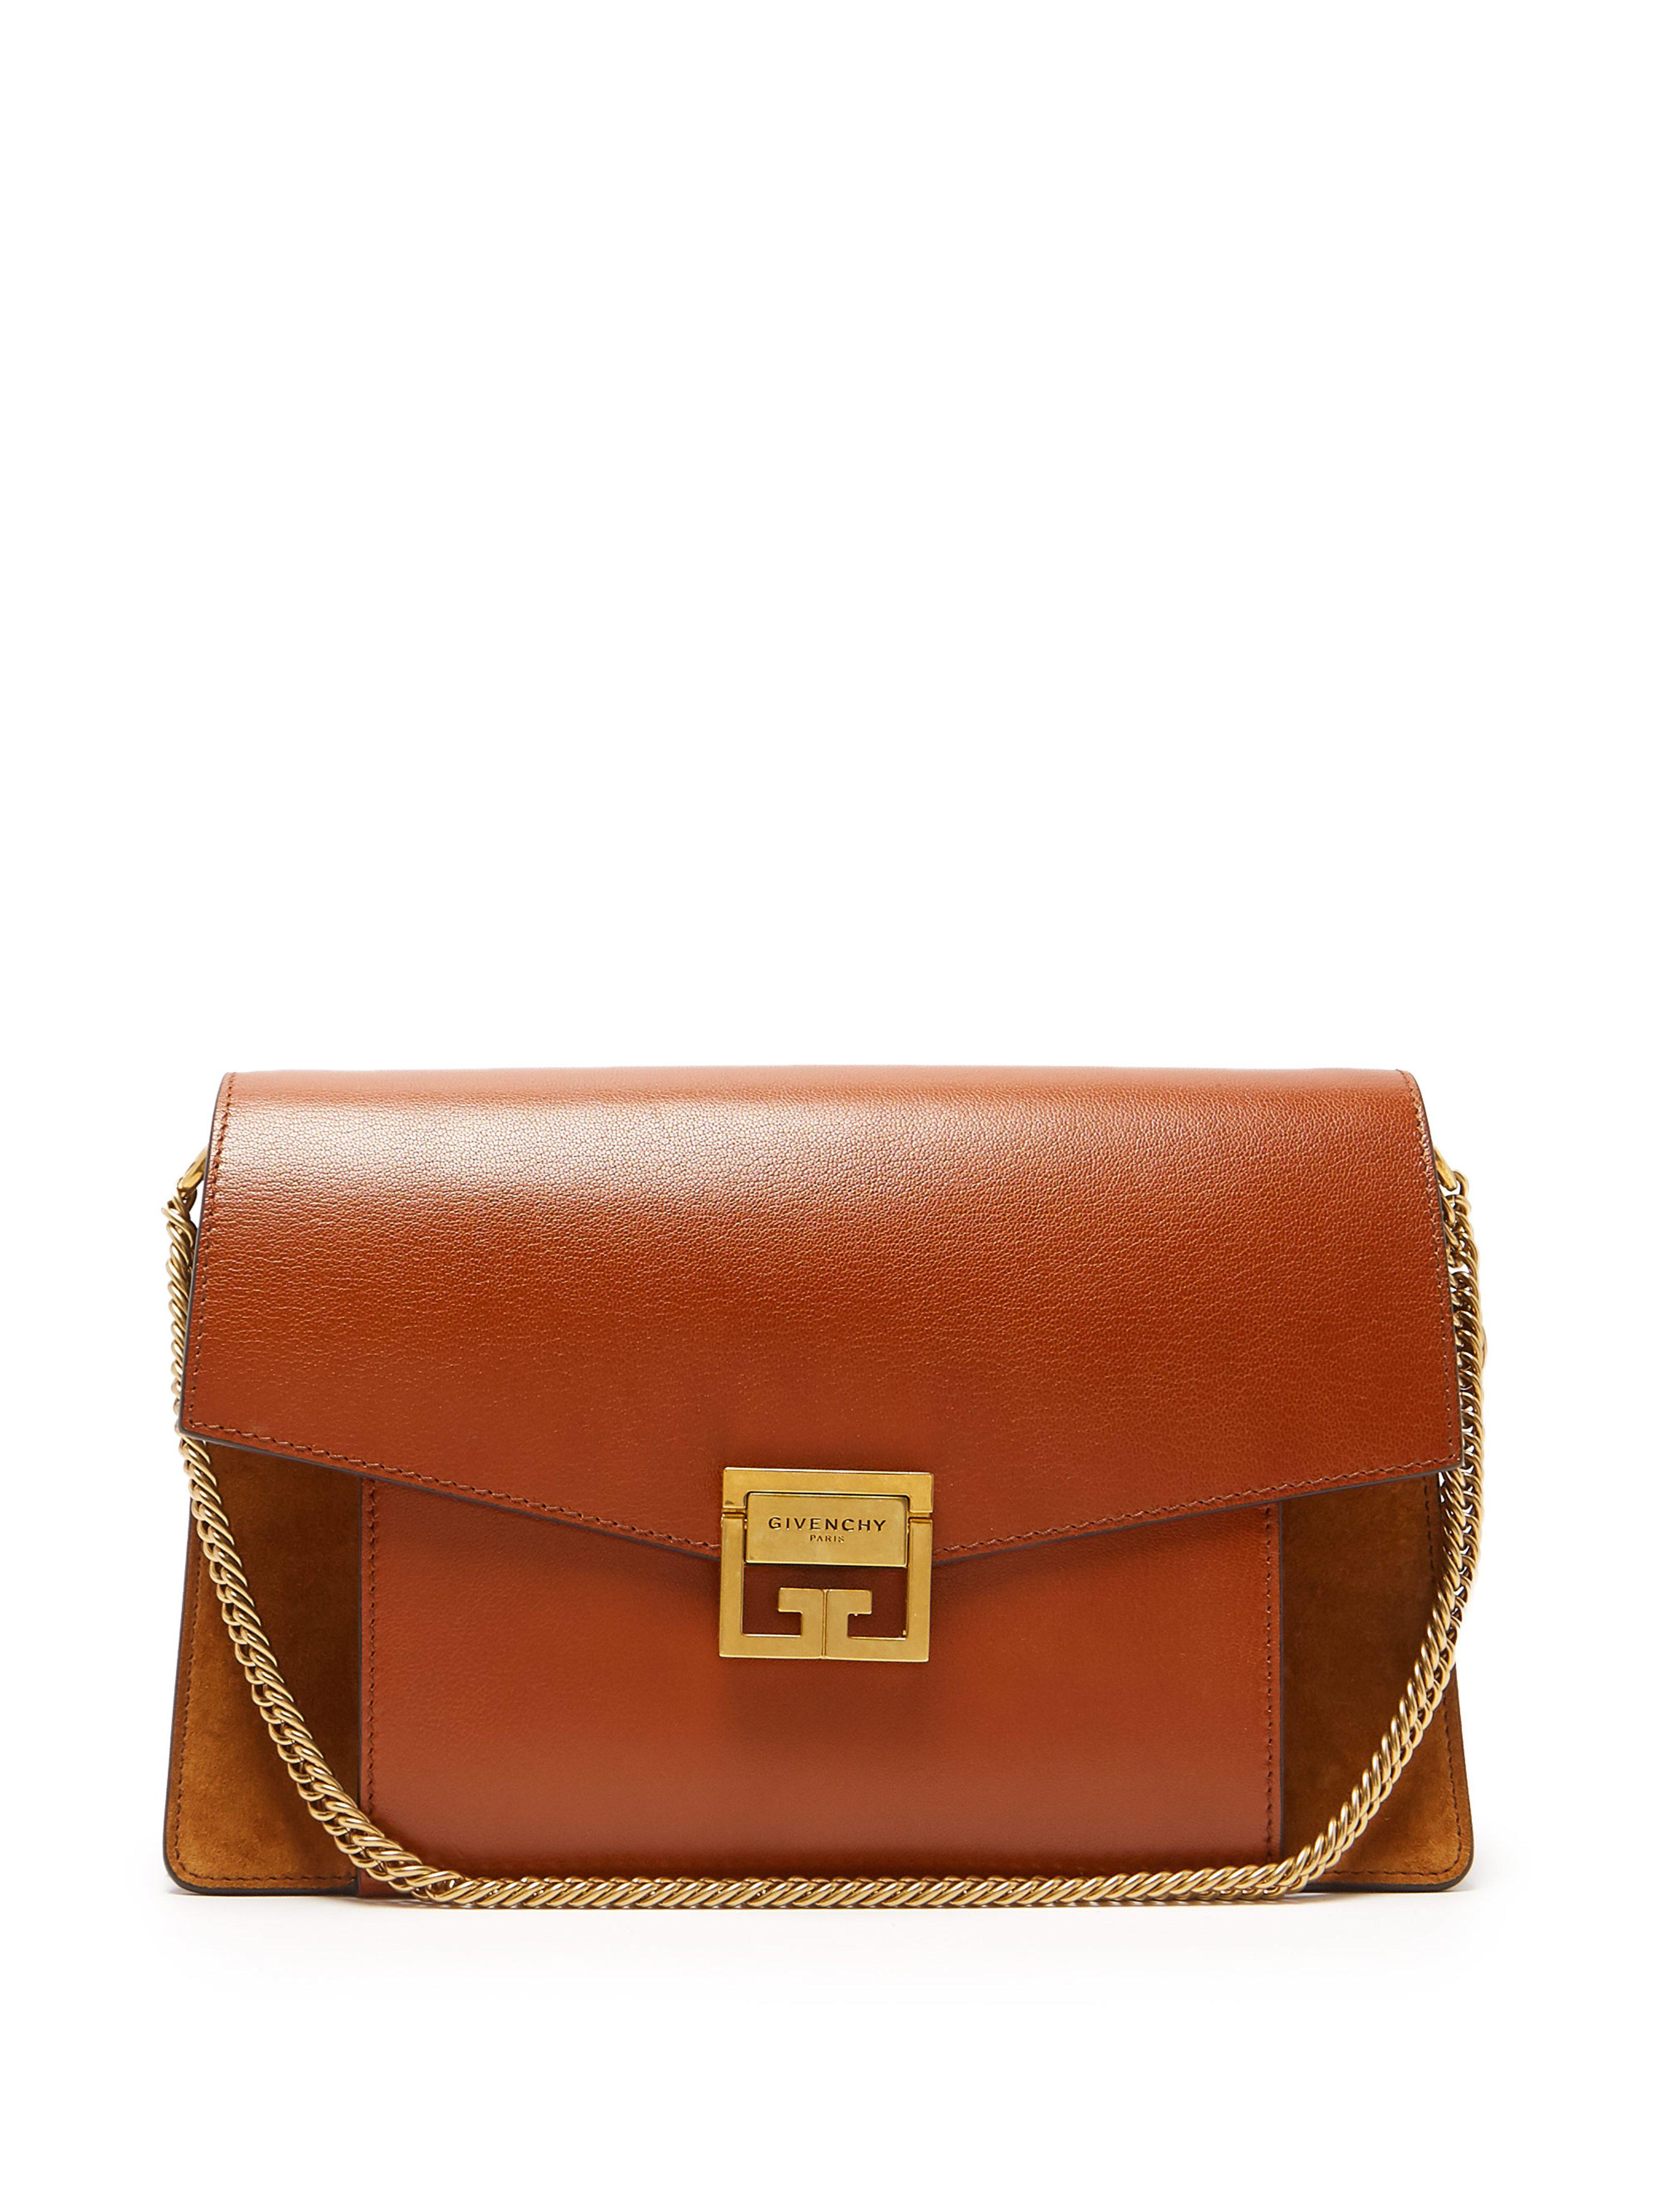 Givenchy Gv3 Medium Suede And Leather Shoulder Bag in Tan (Brown) - Lyst